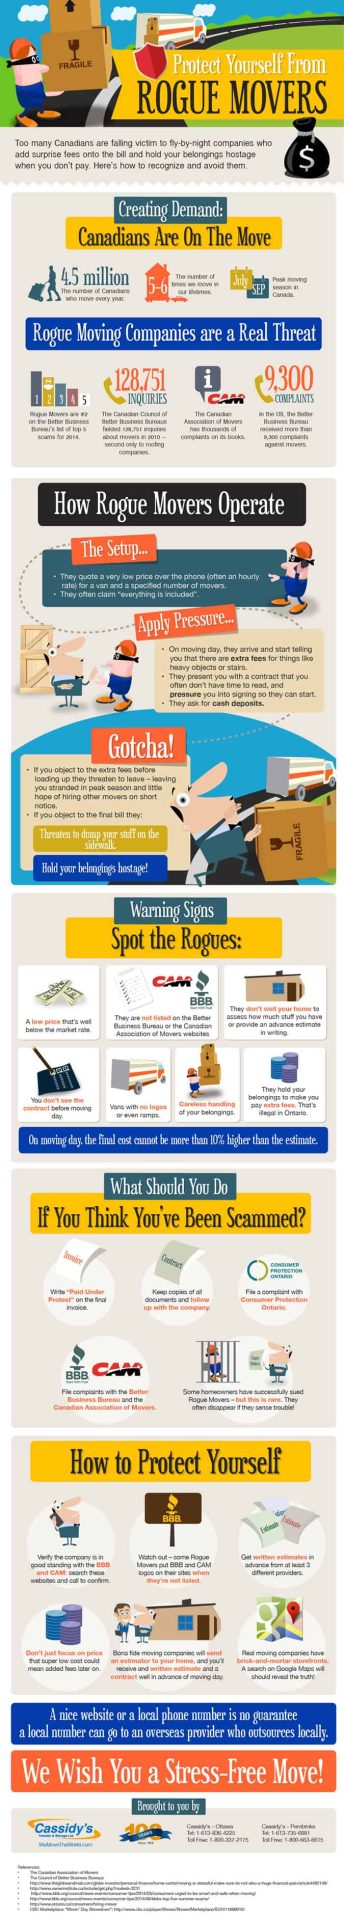 Protect Yourself From Rogue Movers Infographic